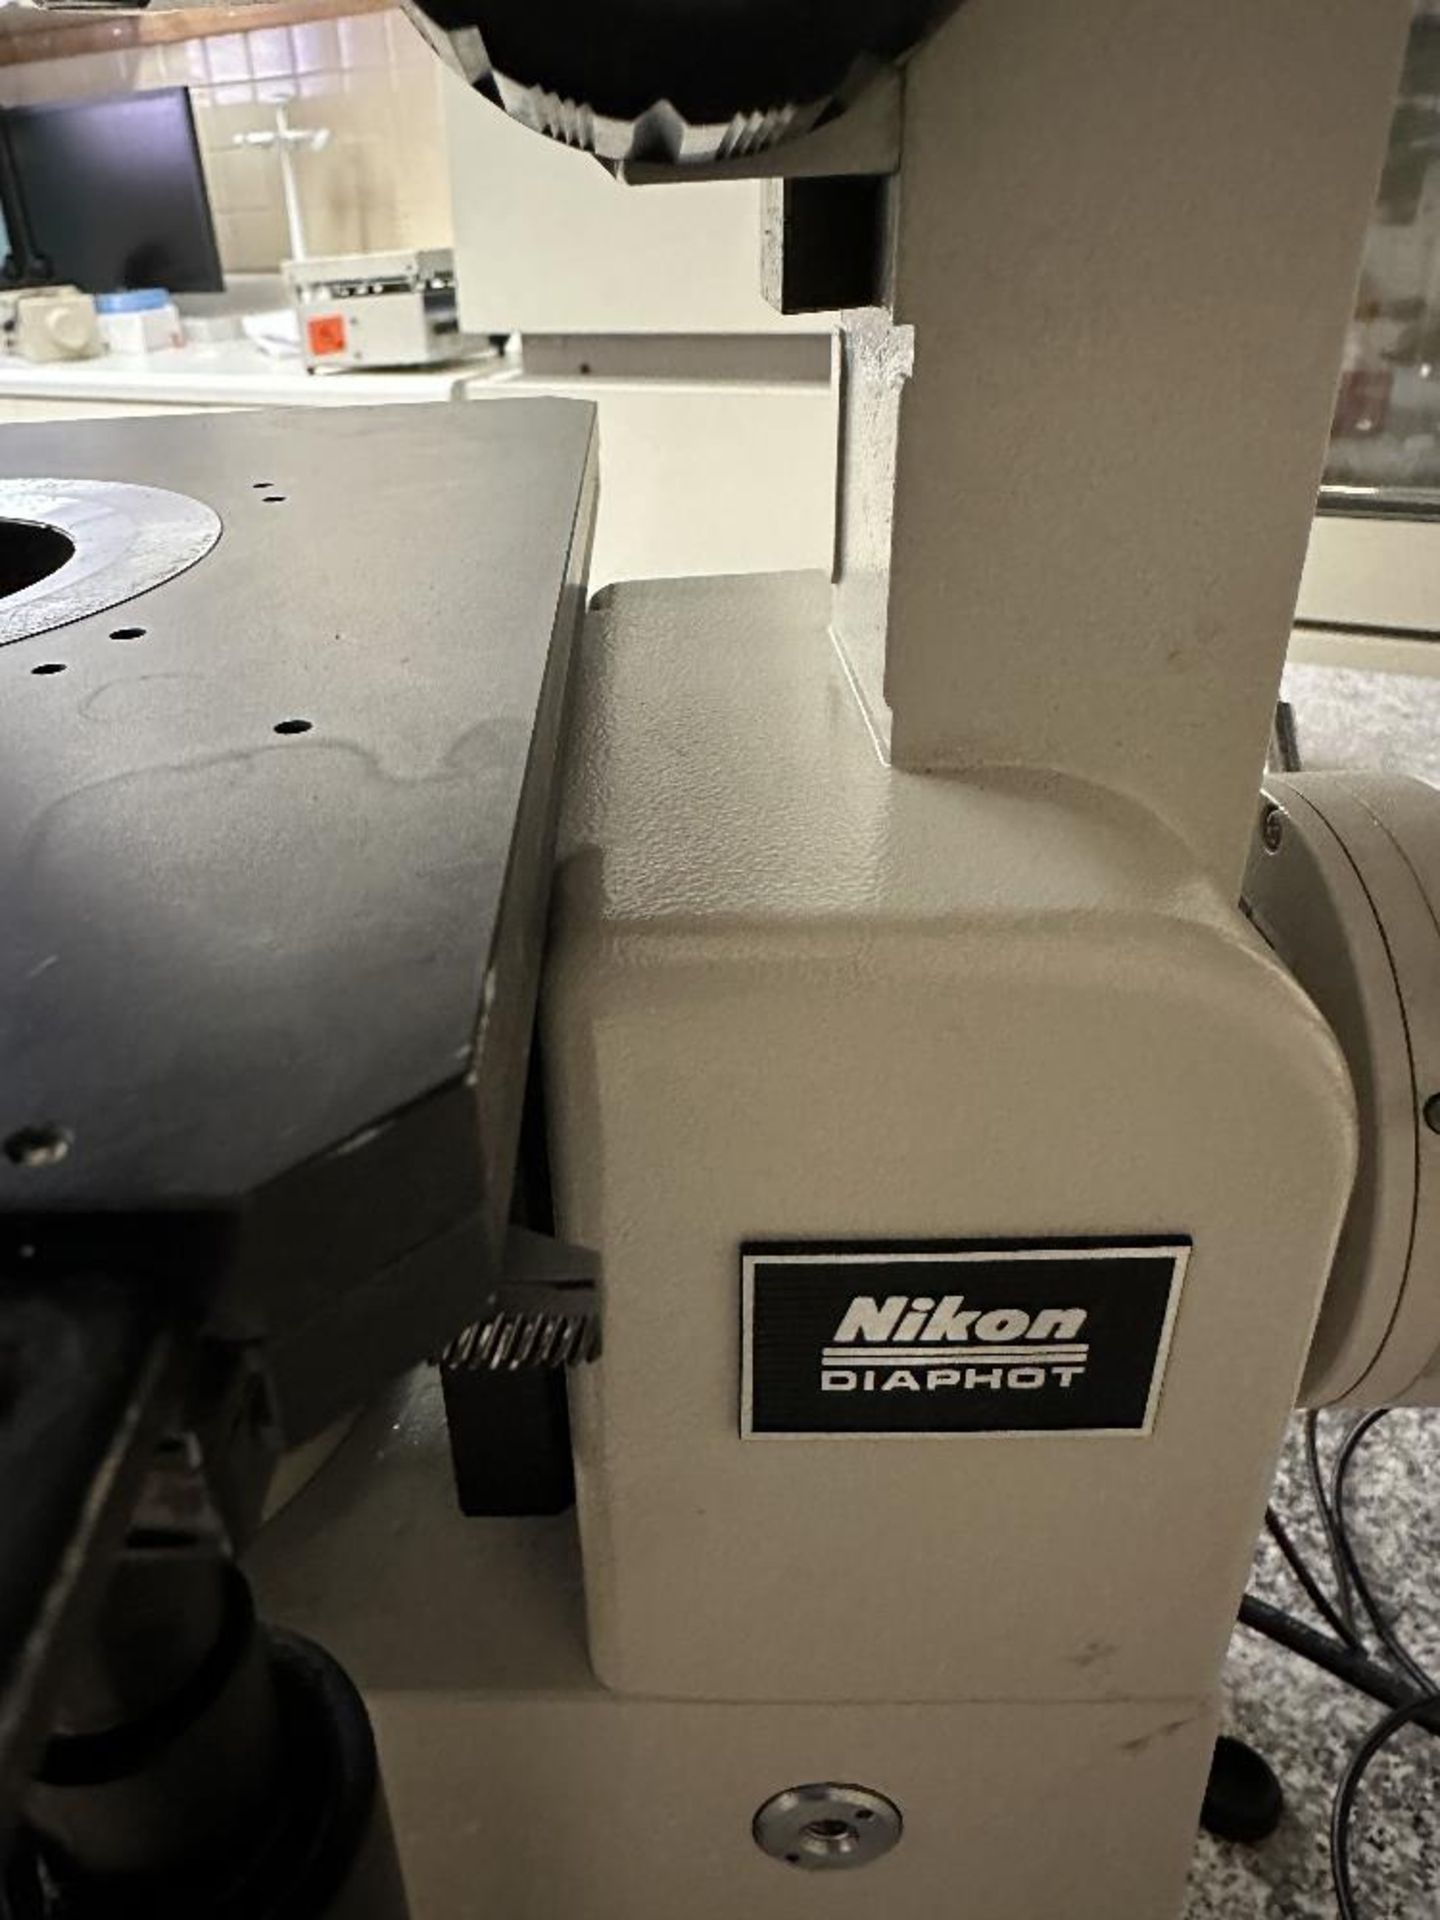 Nikon Diaphot Microscope w/Contrast, Objectives (LOCATED IN MIDDLETOWN, N.Y.)-FOR PACKAGING & - Image 5 of 14